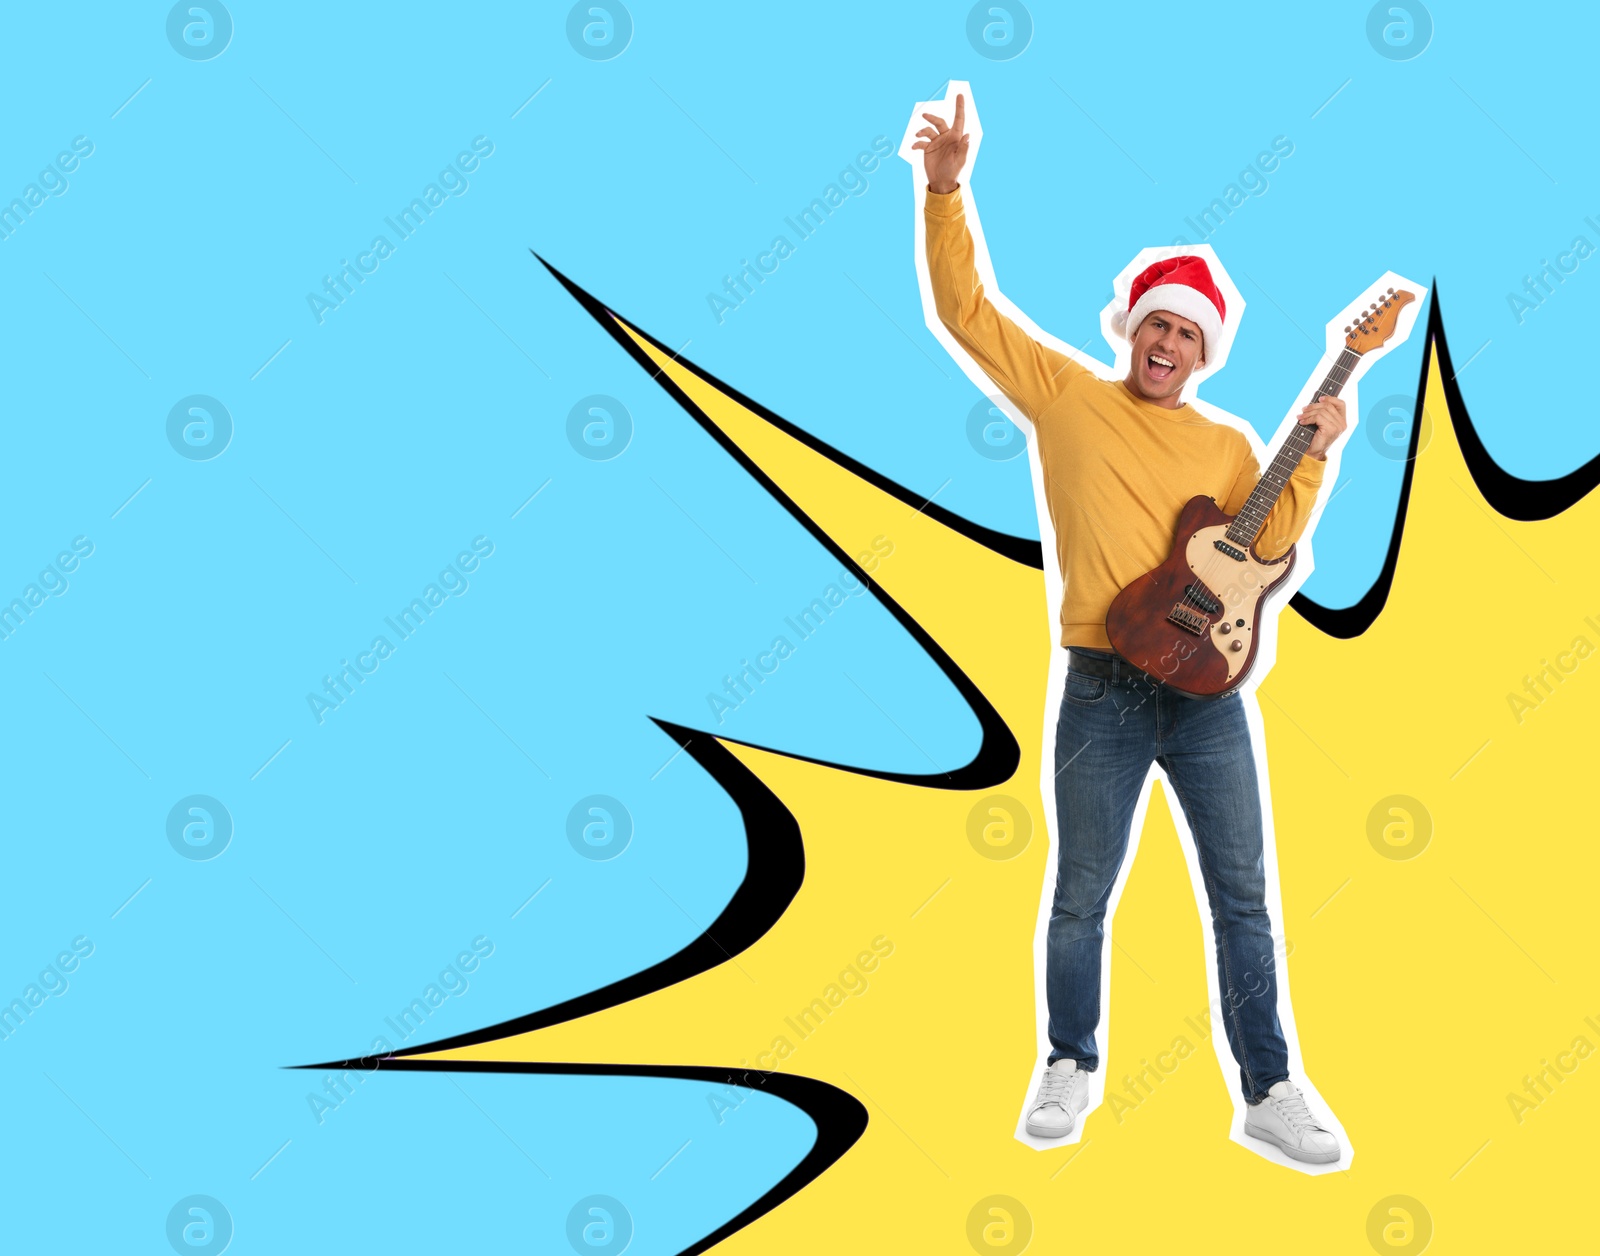 Image of Pop art poster. Man in Santa hat playing guitar on bright comic style background. Space for text